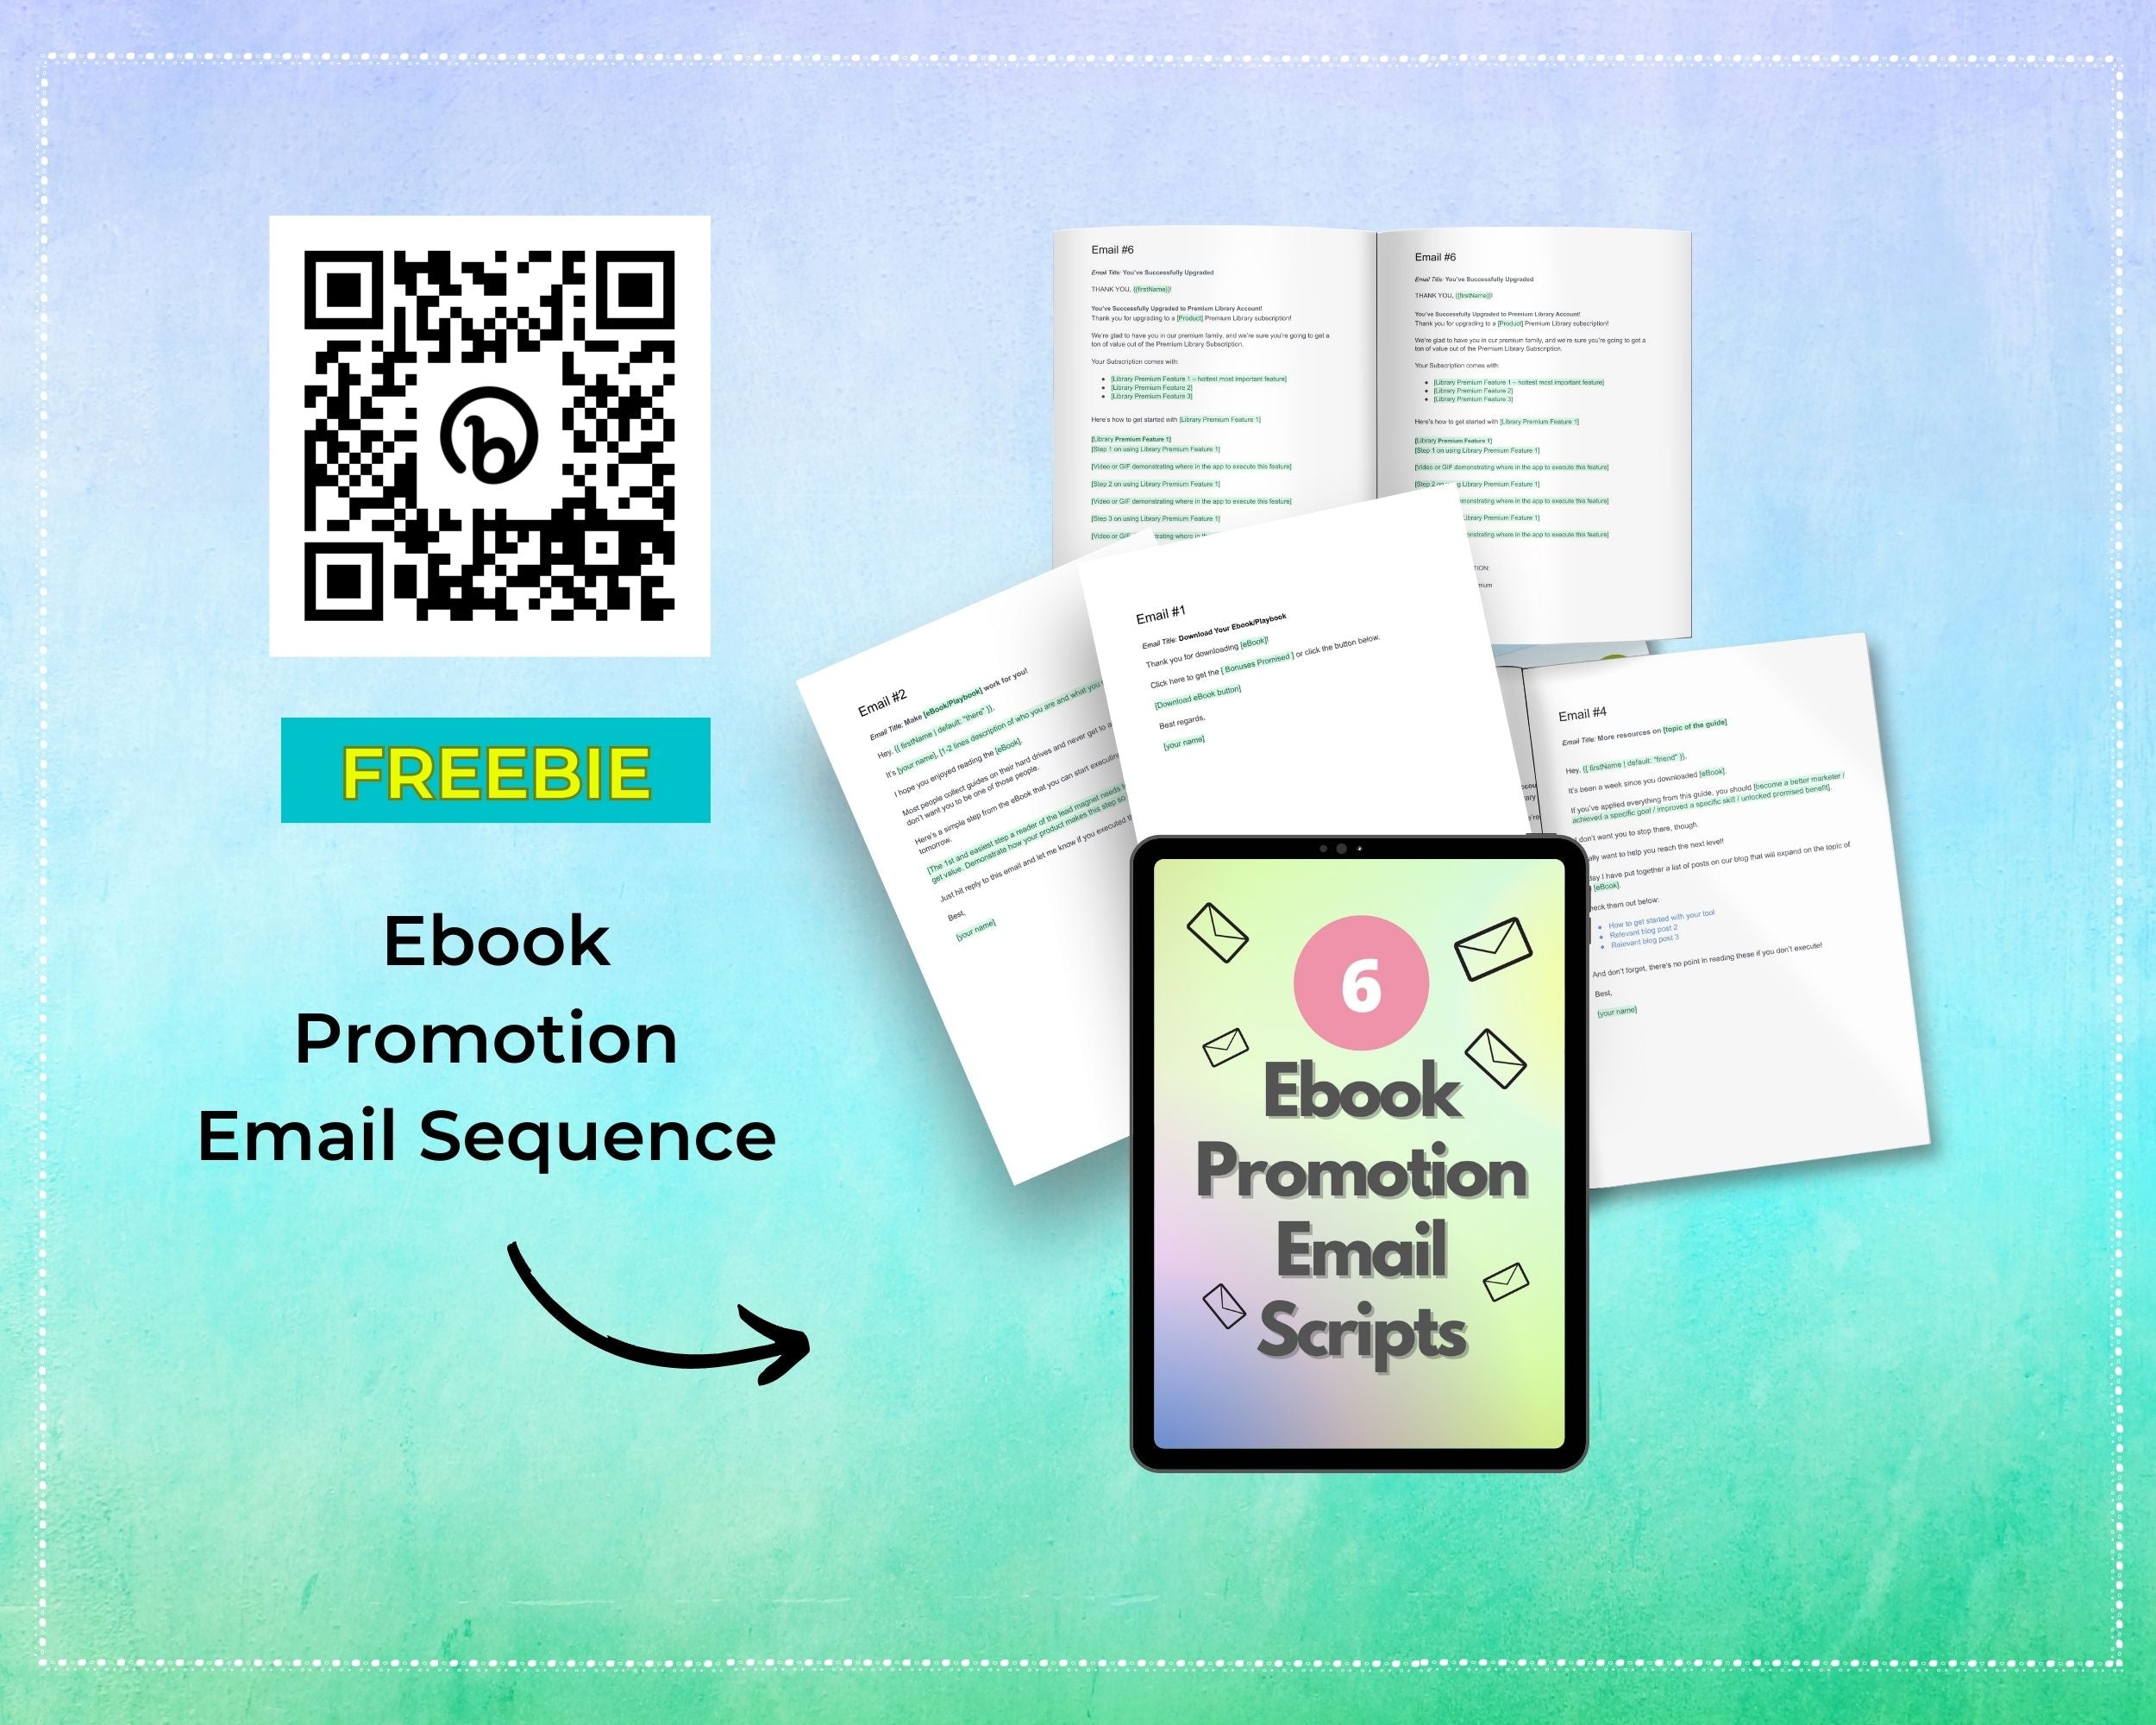 BUNDLE of 7 Investment Playbooks in Canva